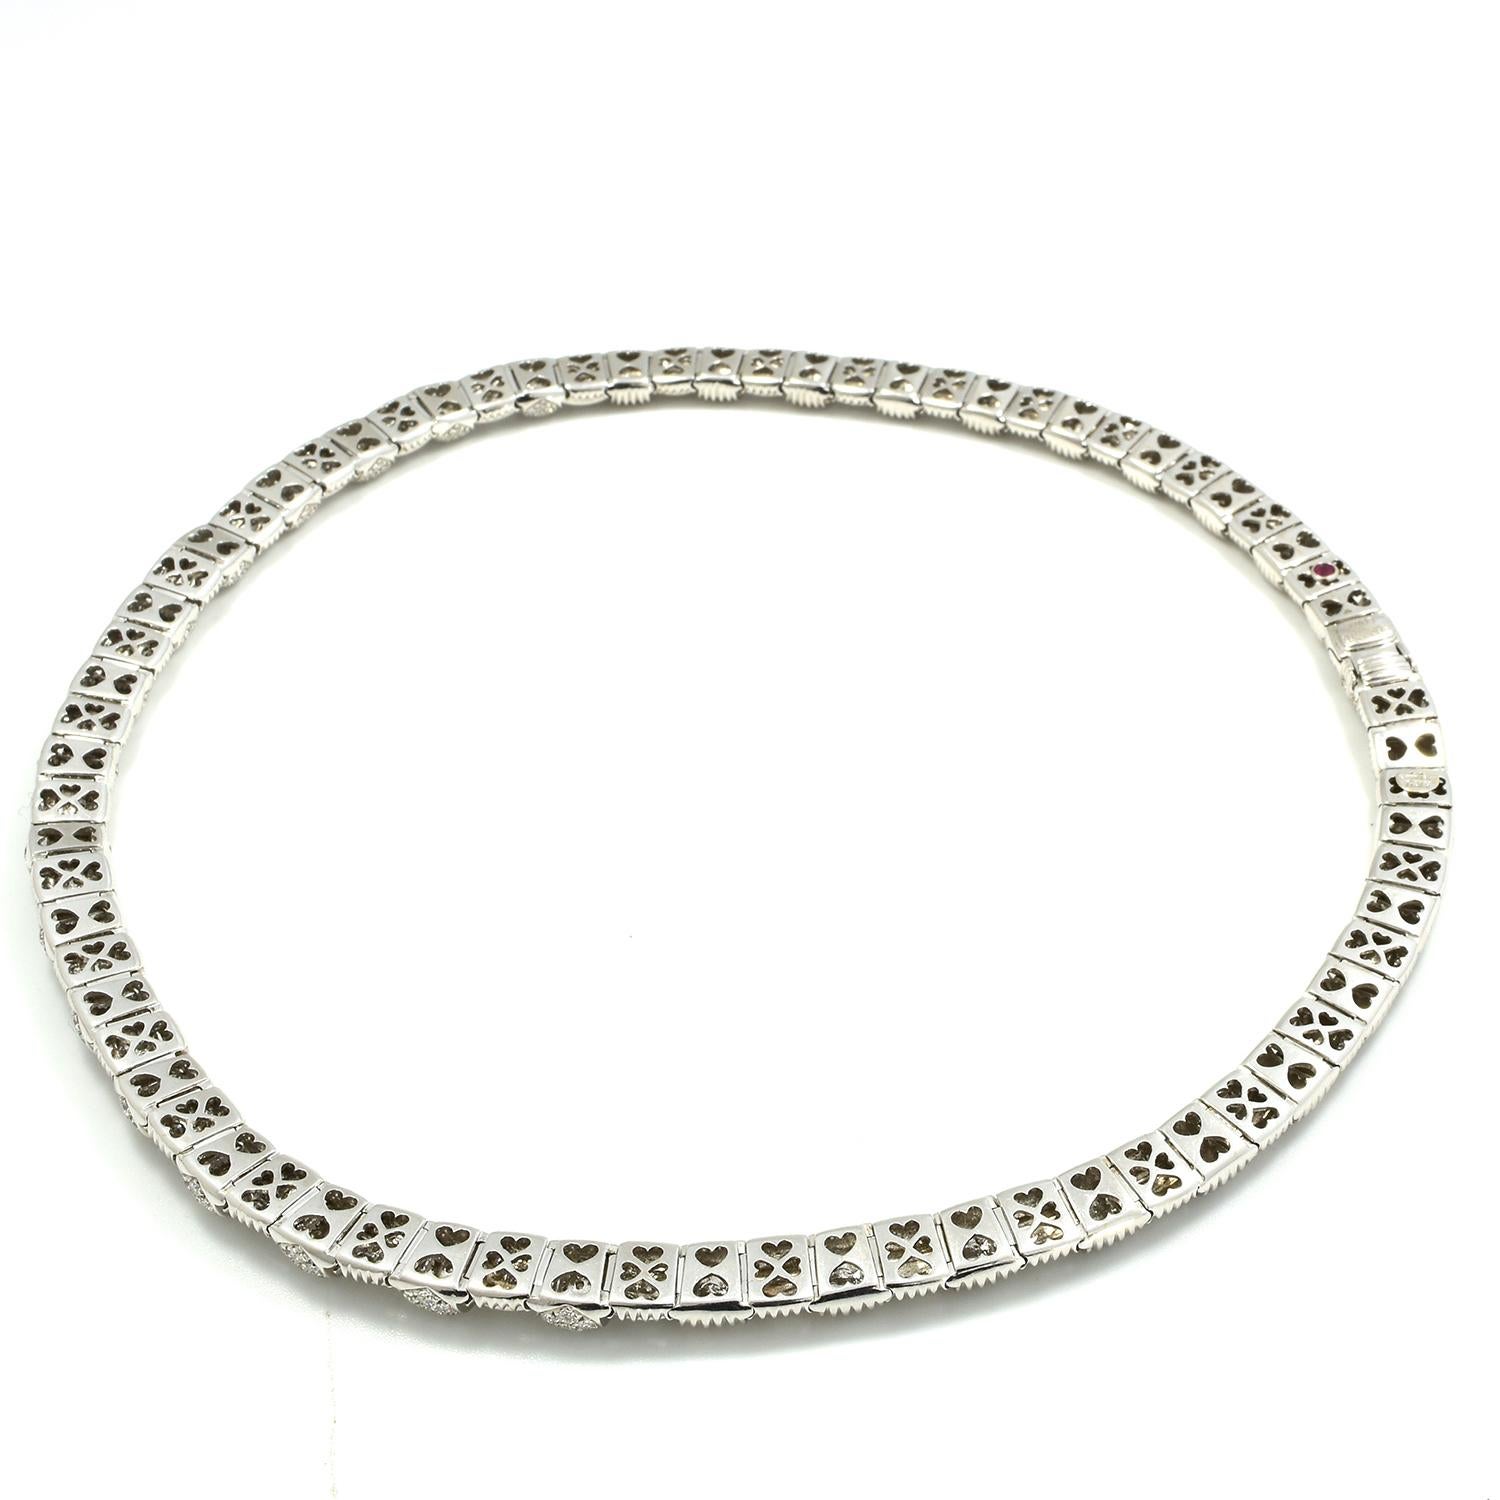 Designer: Roberto Coin

Collection: Appassionata

Metal: White Gold

Metal Purity: 18k

Total Item Weight (grams): 76.3 g

Necklace Length: 16 inches

Stones: Round Brilliant Cut Diamonds

Total Carat Weight: 7.36 TCW

Includes:  24 Months